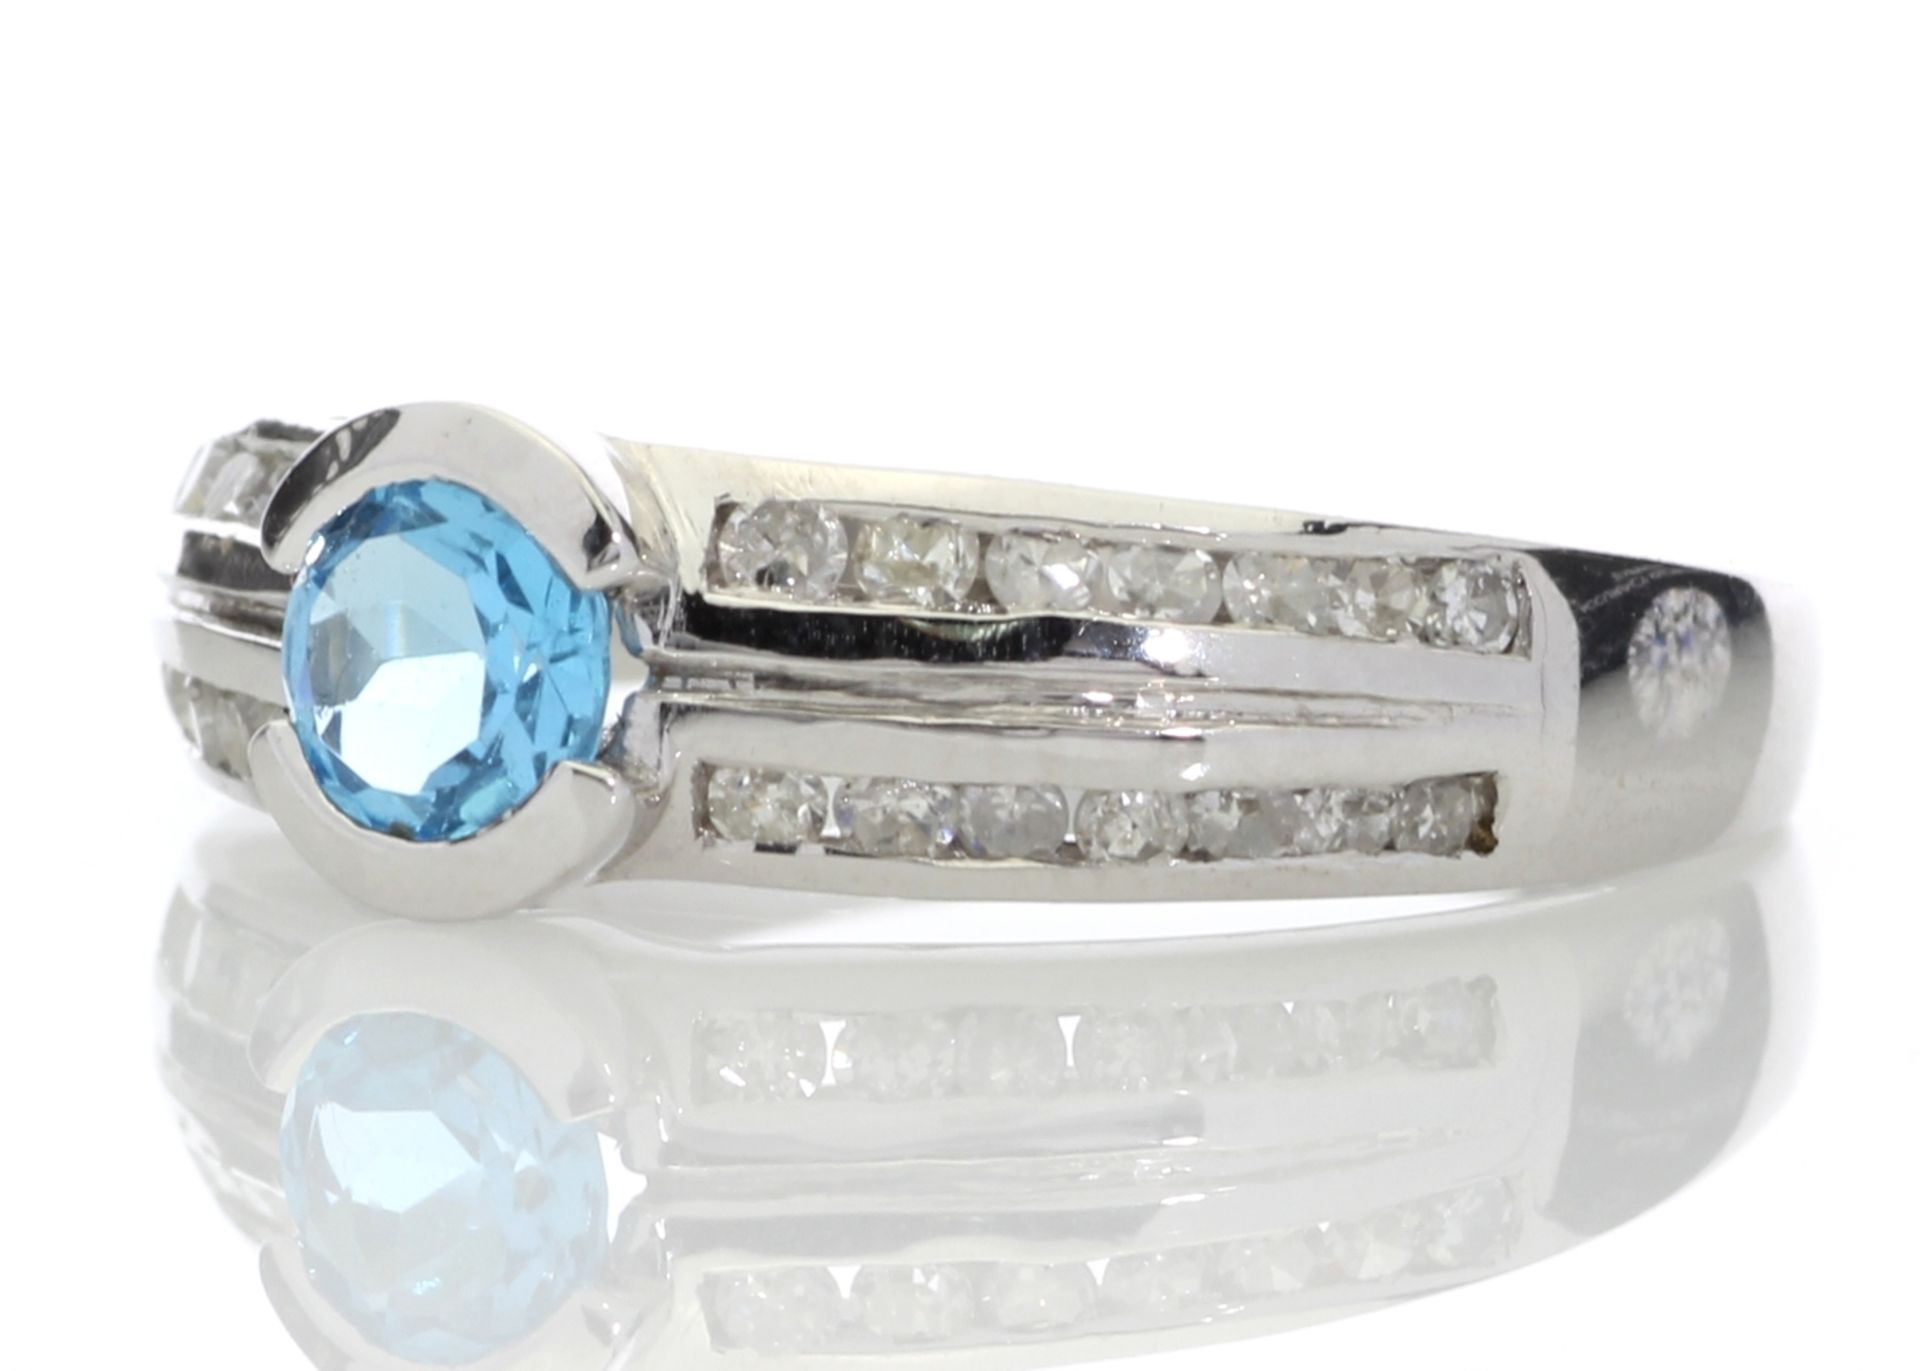 9ct White Gold Double Channel Set Diamond and Blue Topaz Ring 0.36 Carats - Image 2 of 5